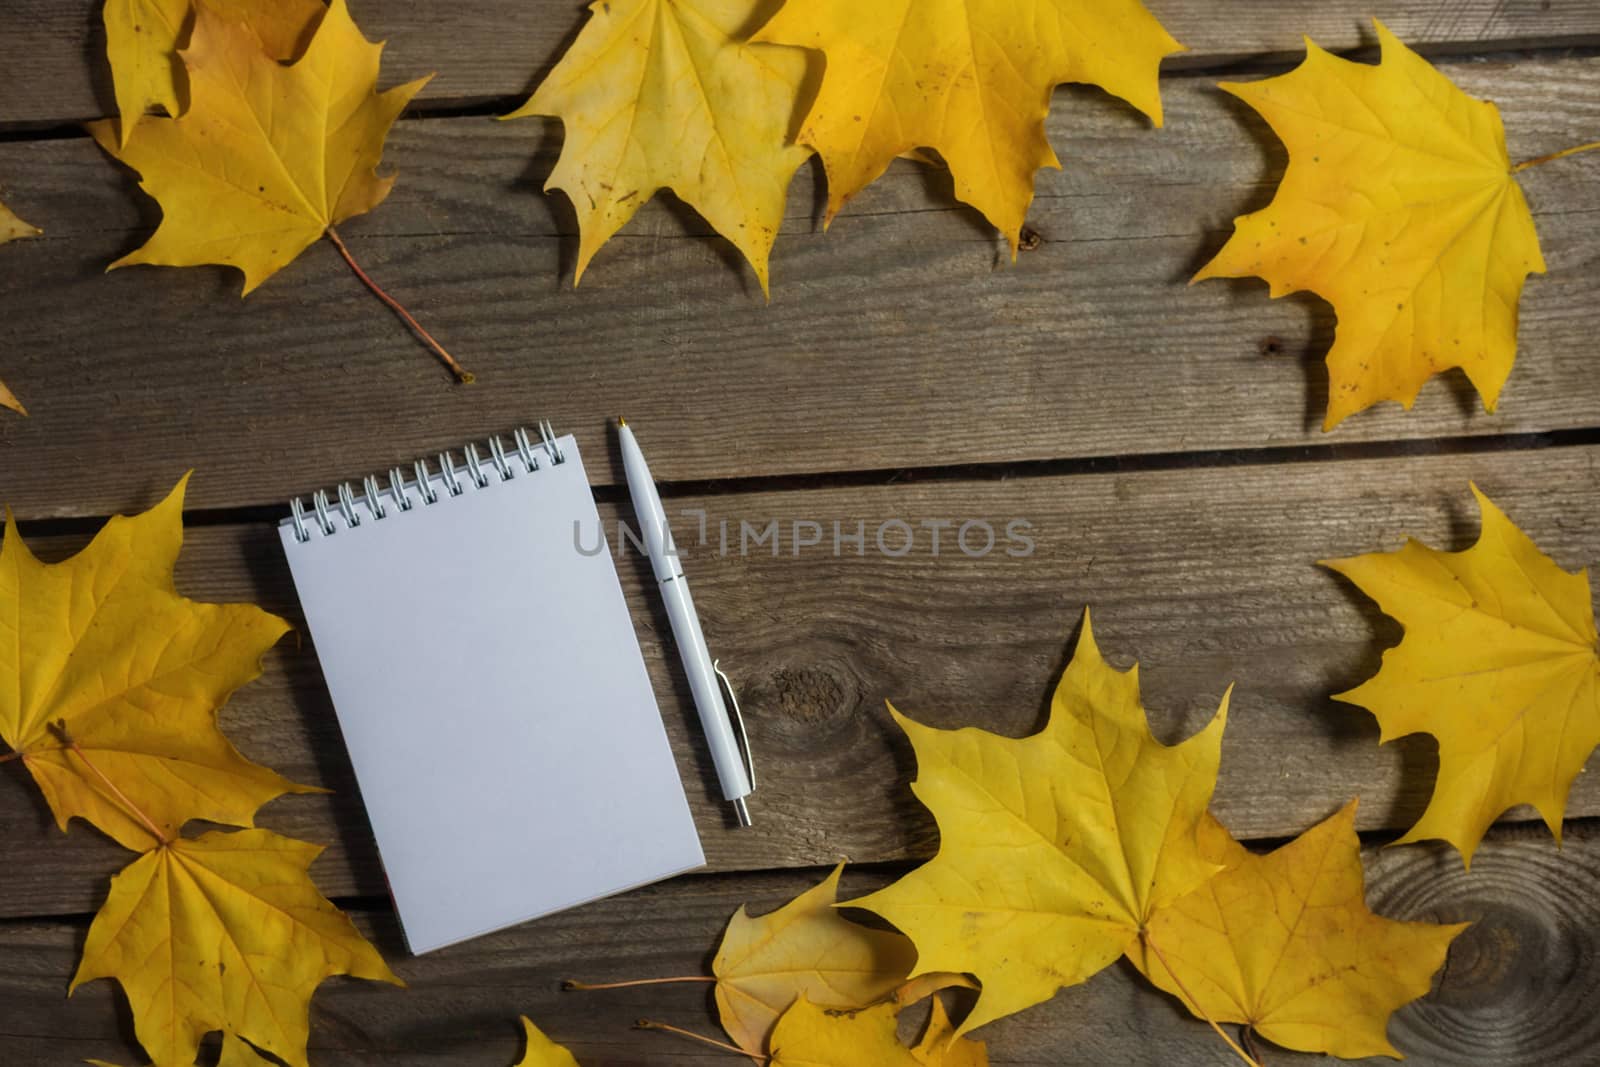 .Autumn fallen leaves and office supplies on wooden background